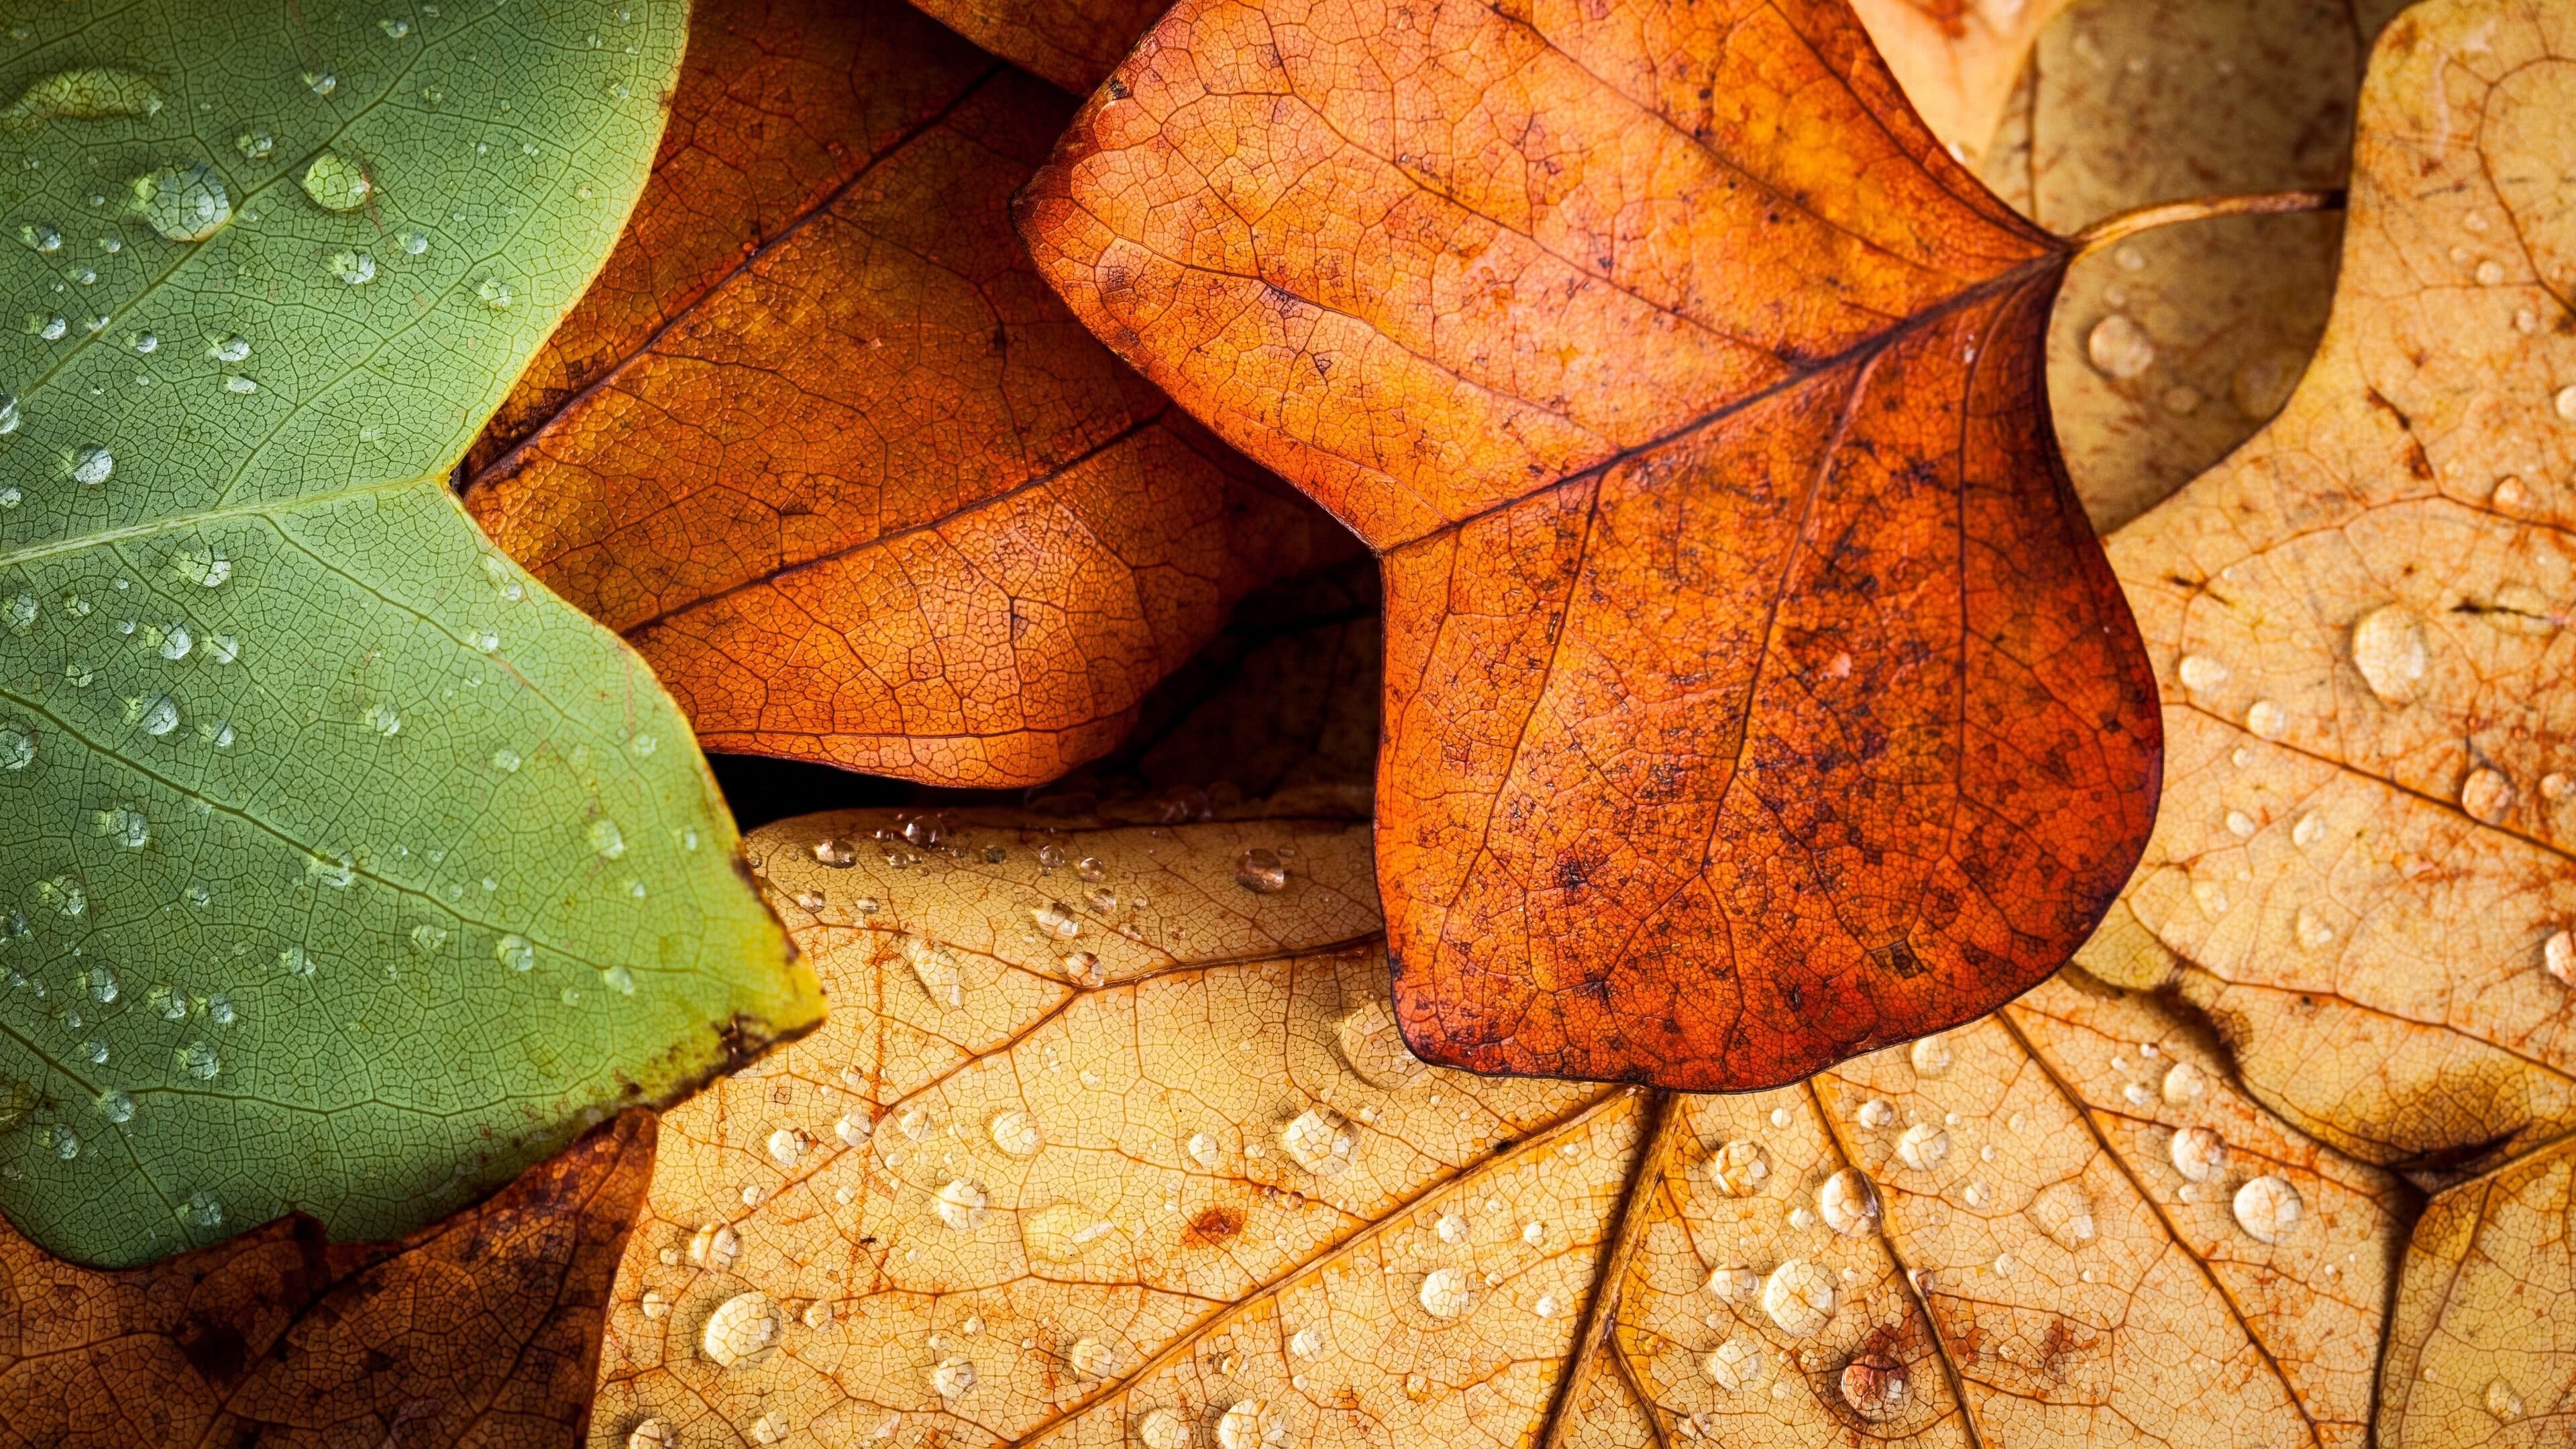 Leaf: Autumn, The most important organs of most vascular plants. 3840x2160 4K Background.